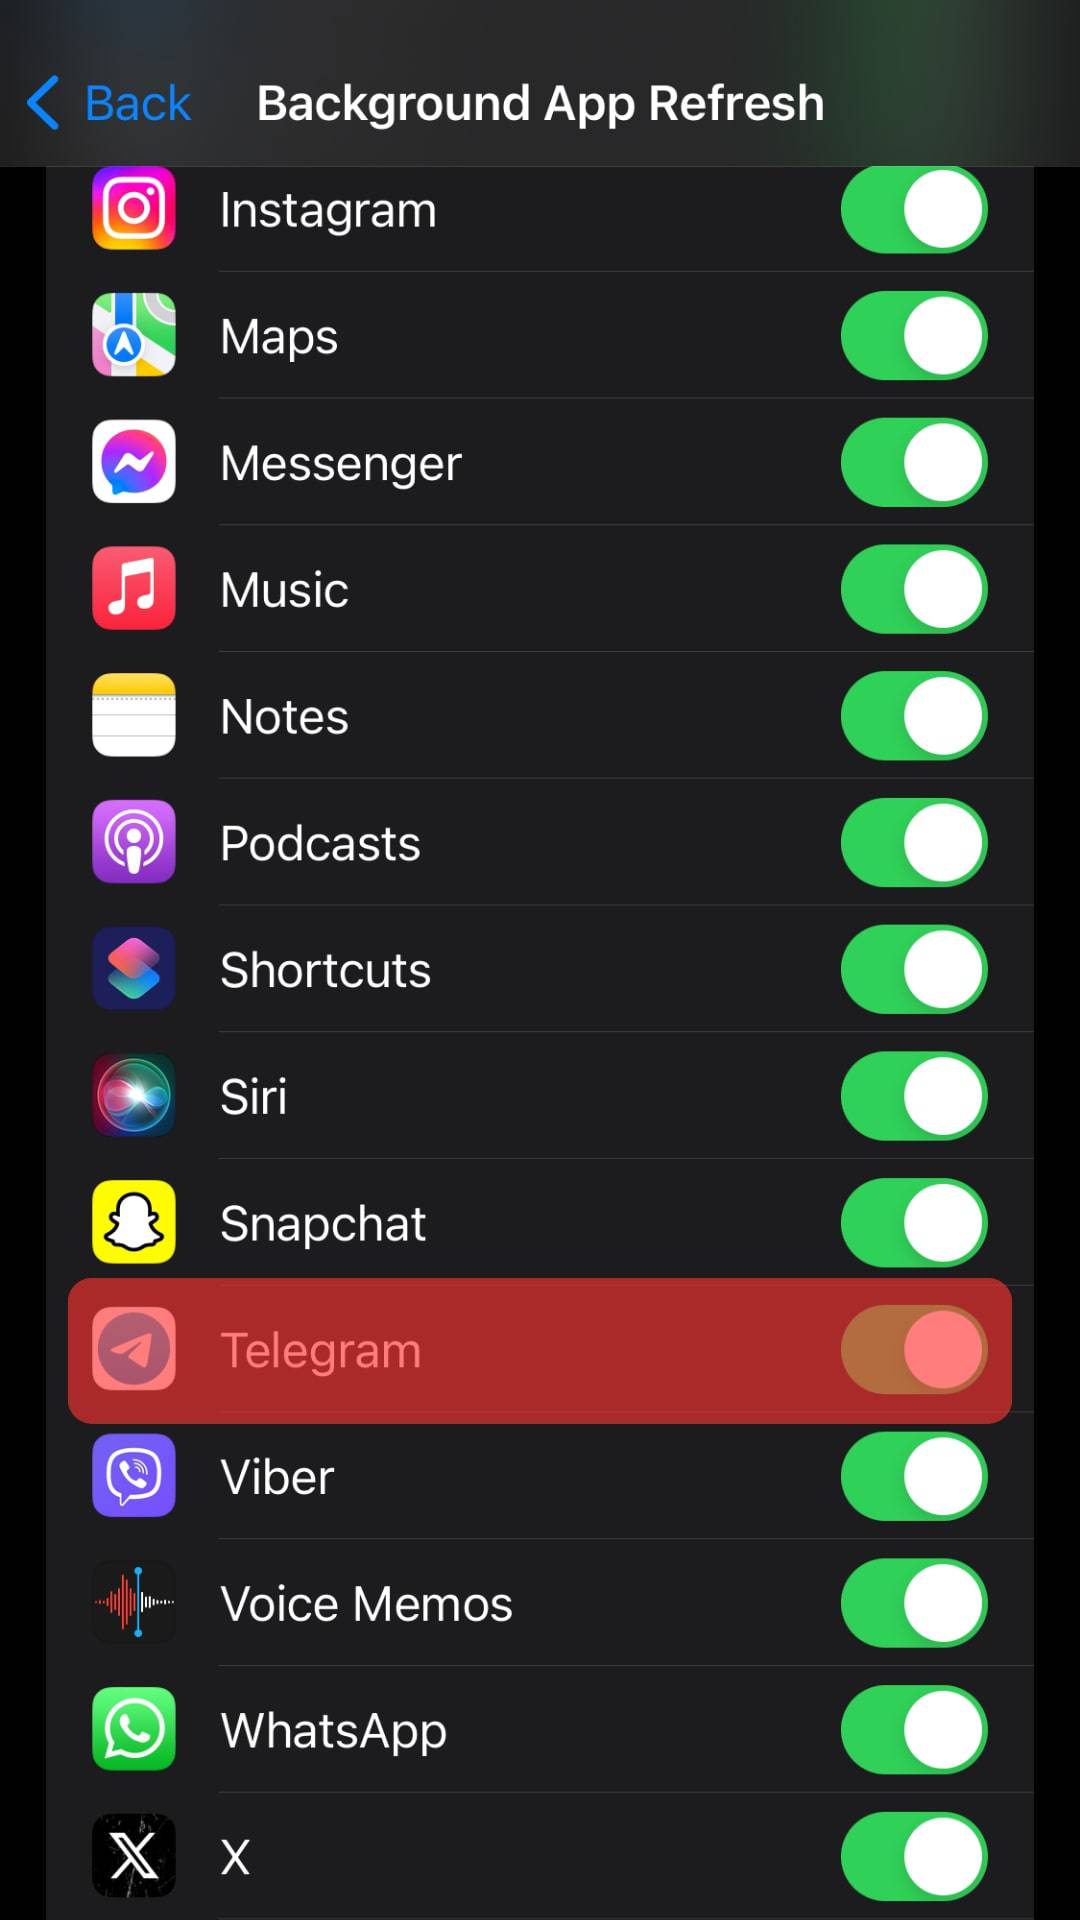 Turn The Toggle Off Next To Telegram